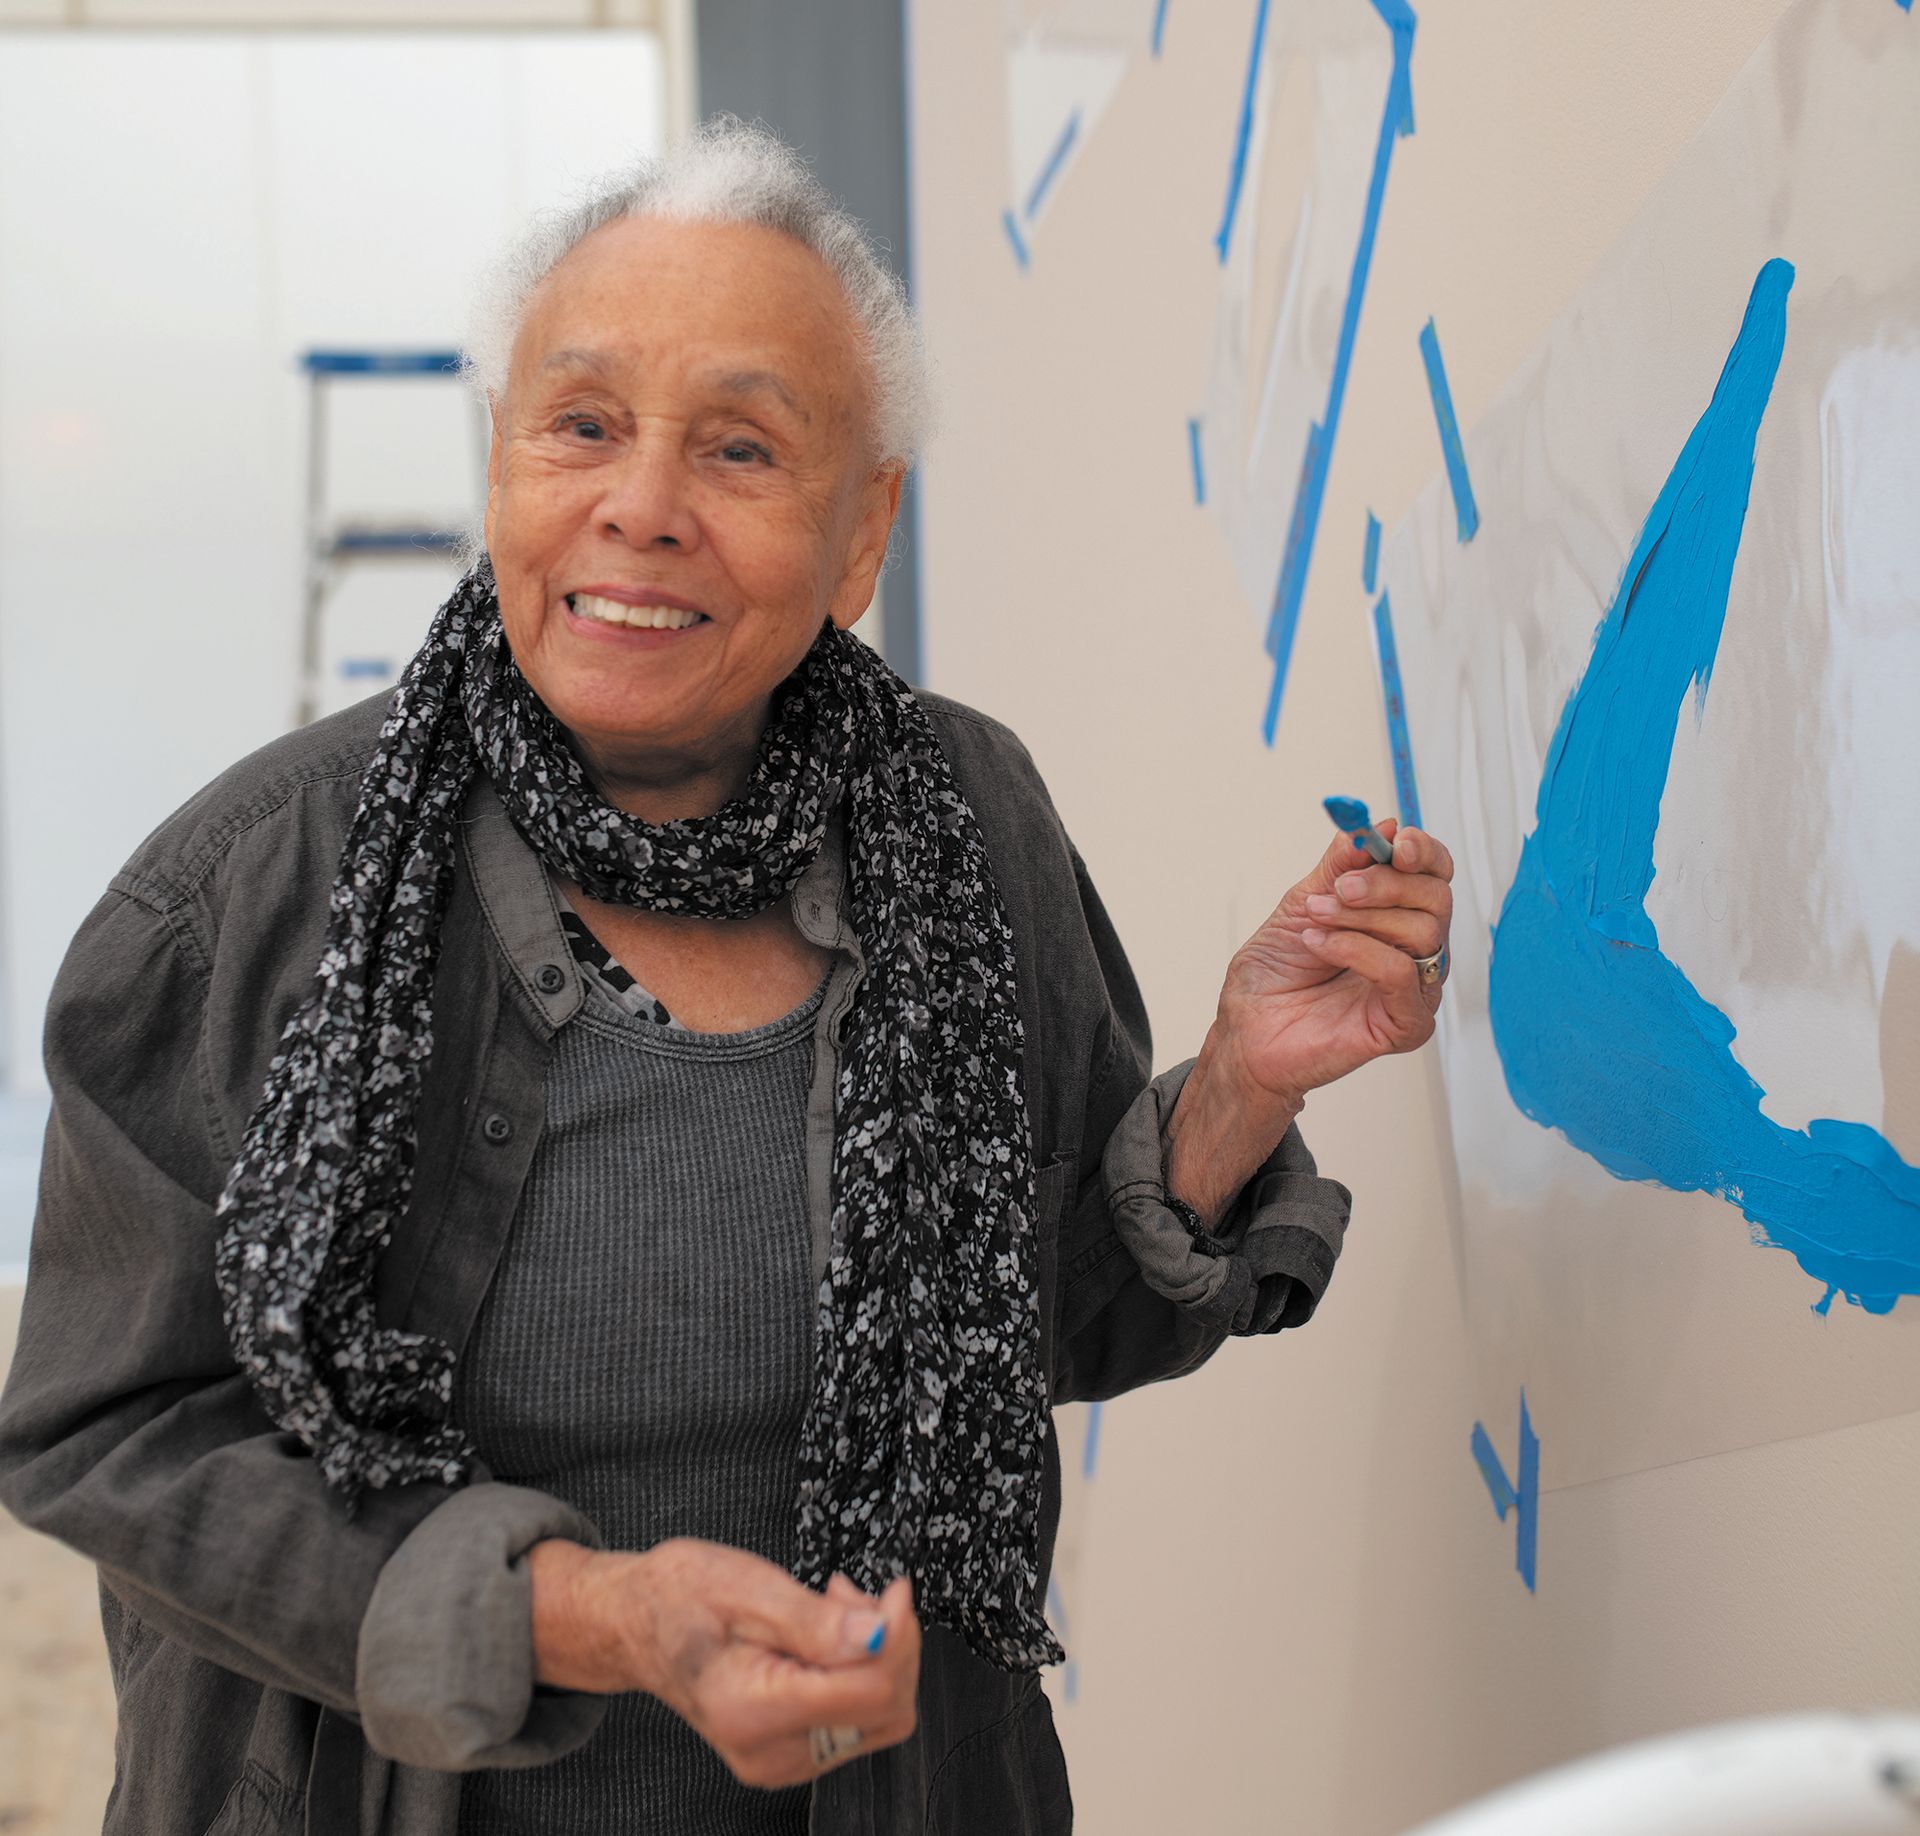 Artist Betye Saar painting her mural L.A. Energy on Roberts Projects's stand at Frieze Los Angeles. Courtesy of the artist and Roberts Projects Los Angeles, California; Photo Robert Wedemeyer